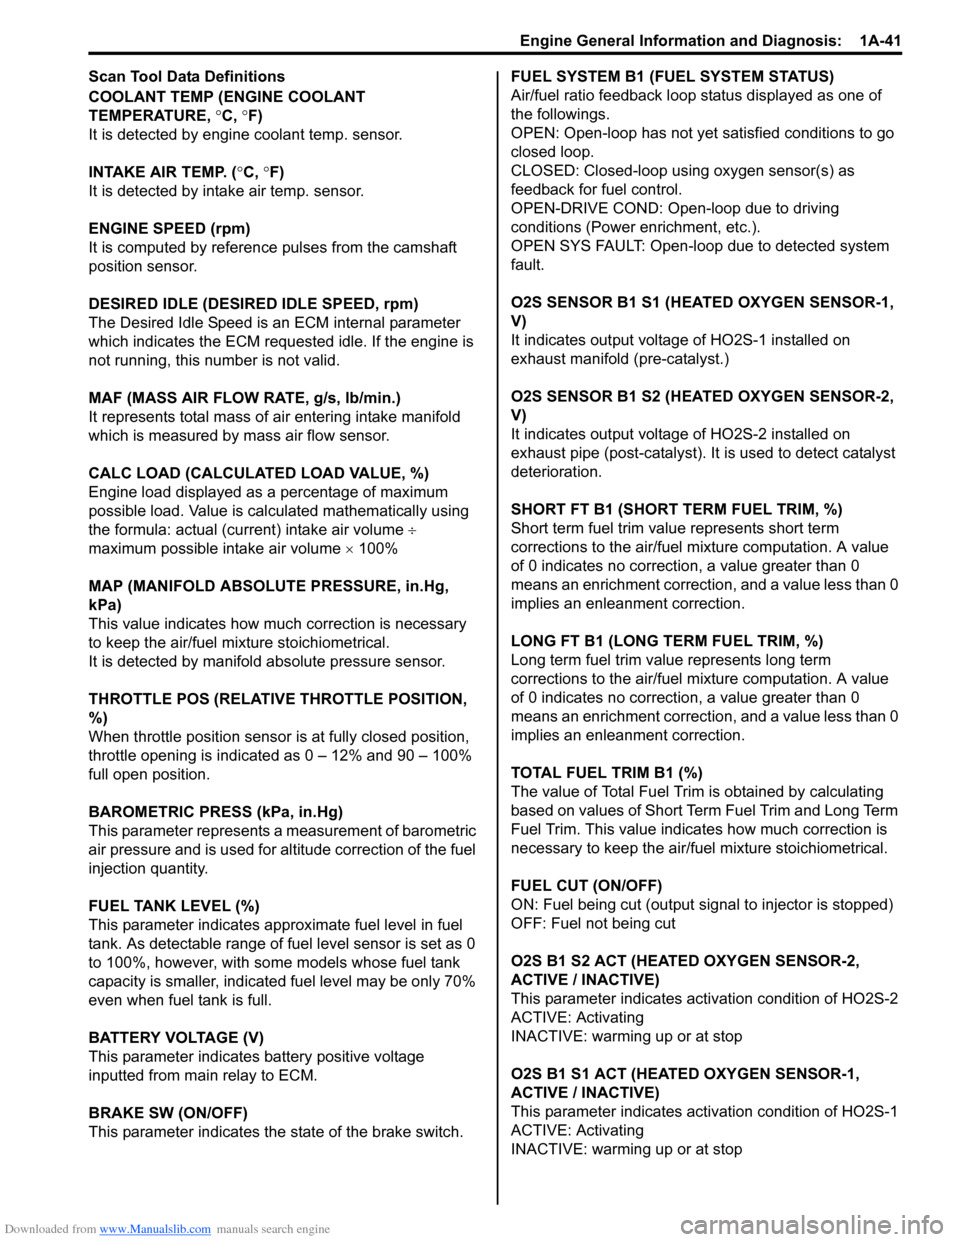 SUZUKI SX4 2006 1.G Service Workshop Manual Downloaded from www.Manualslib.com manuals search engine Engine General Information and Diagnosis:  1A-41
Scan Tool Data Definitions
COOLANT TEMP (ENGINE COOLANT 
TEMPERATURE, °C, °F)
It is detected